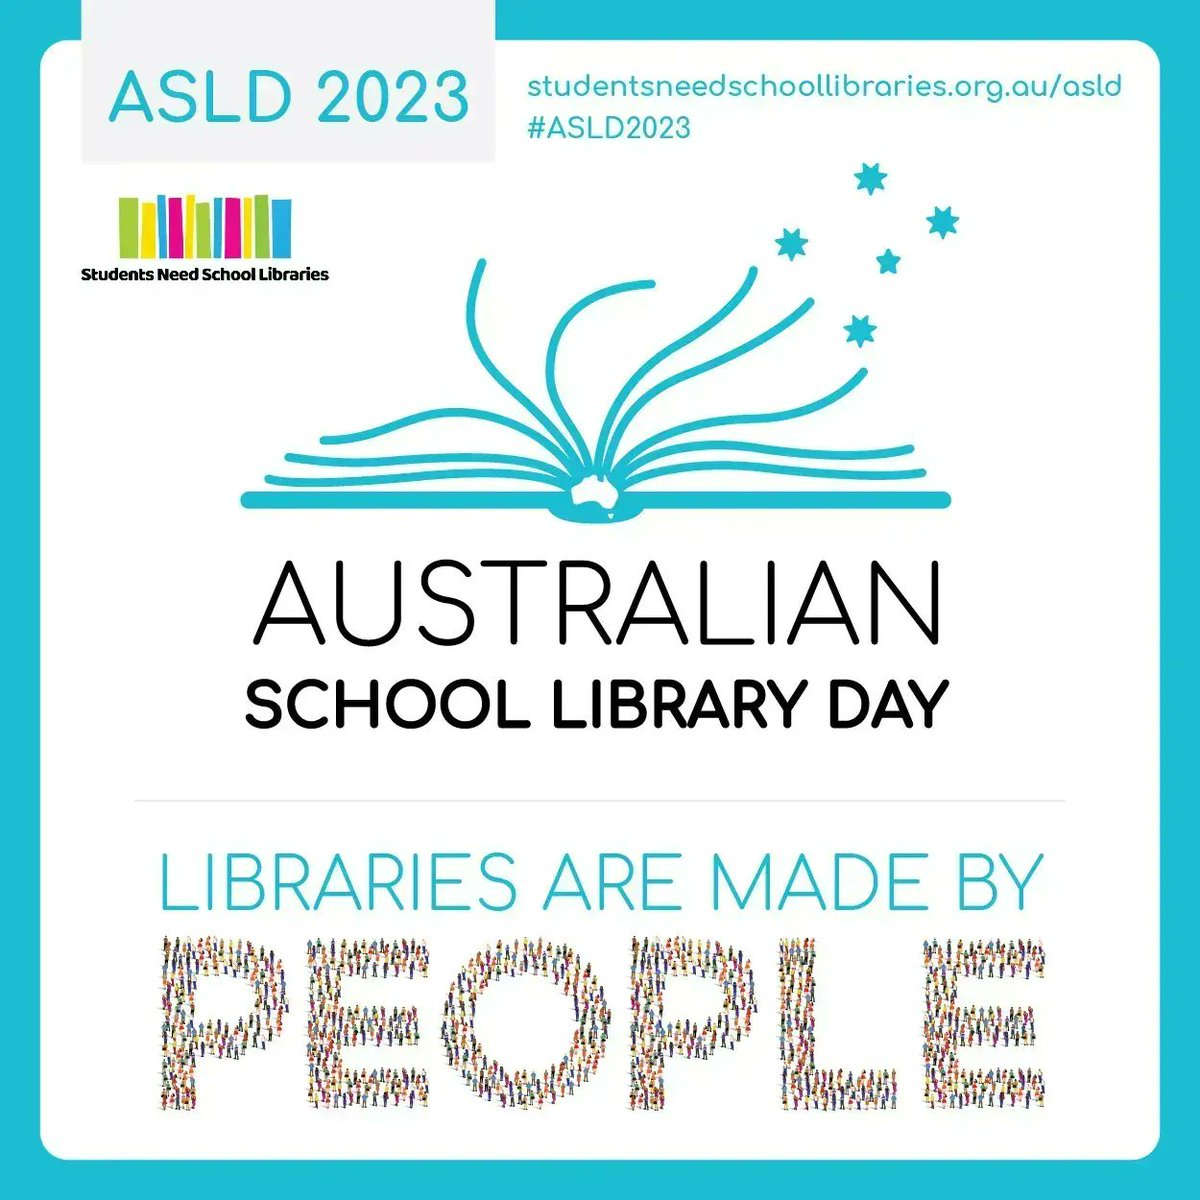 ⚡ The twitter storm hour is here! ⚡ 

Let us know how school libraries have made a difference in your life or the life of someone you know (and don't forget to use the hashtags #ASLD2023 & #StudentsNeedSchoolLibraries)